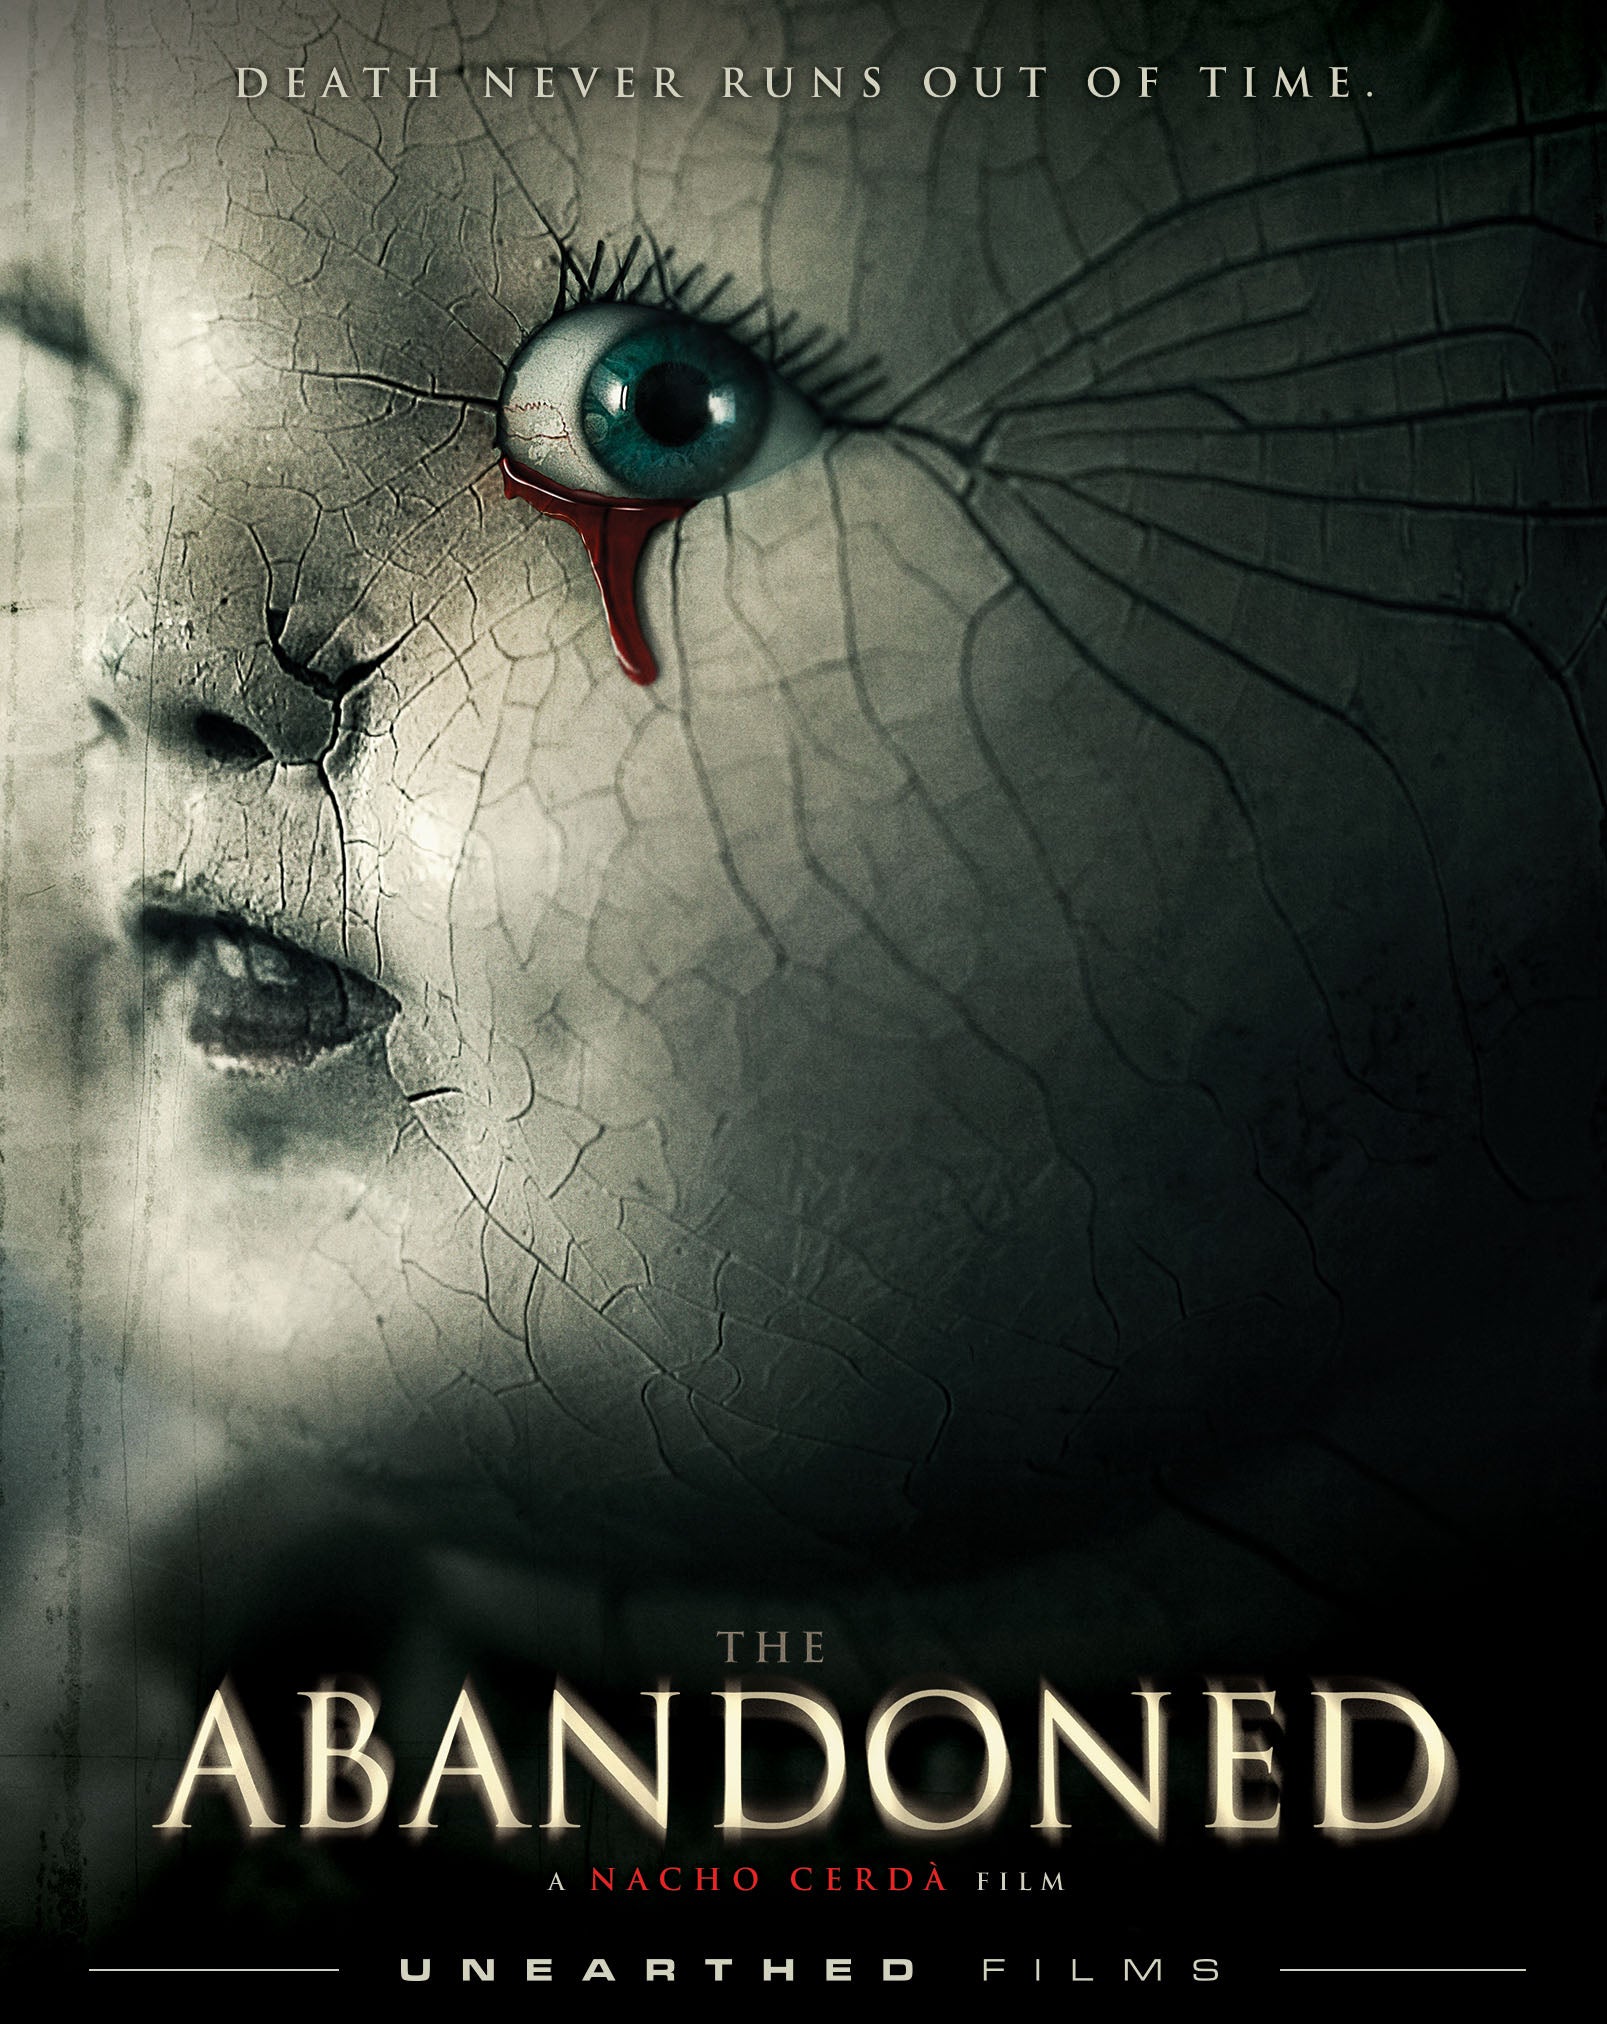 THE ABANDONED (LIMITED EDITION) BLU-RAY